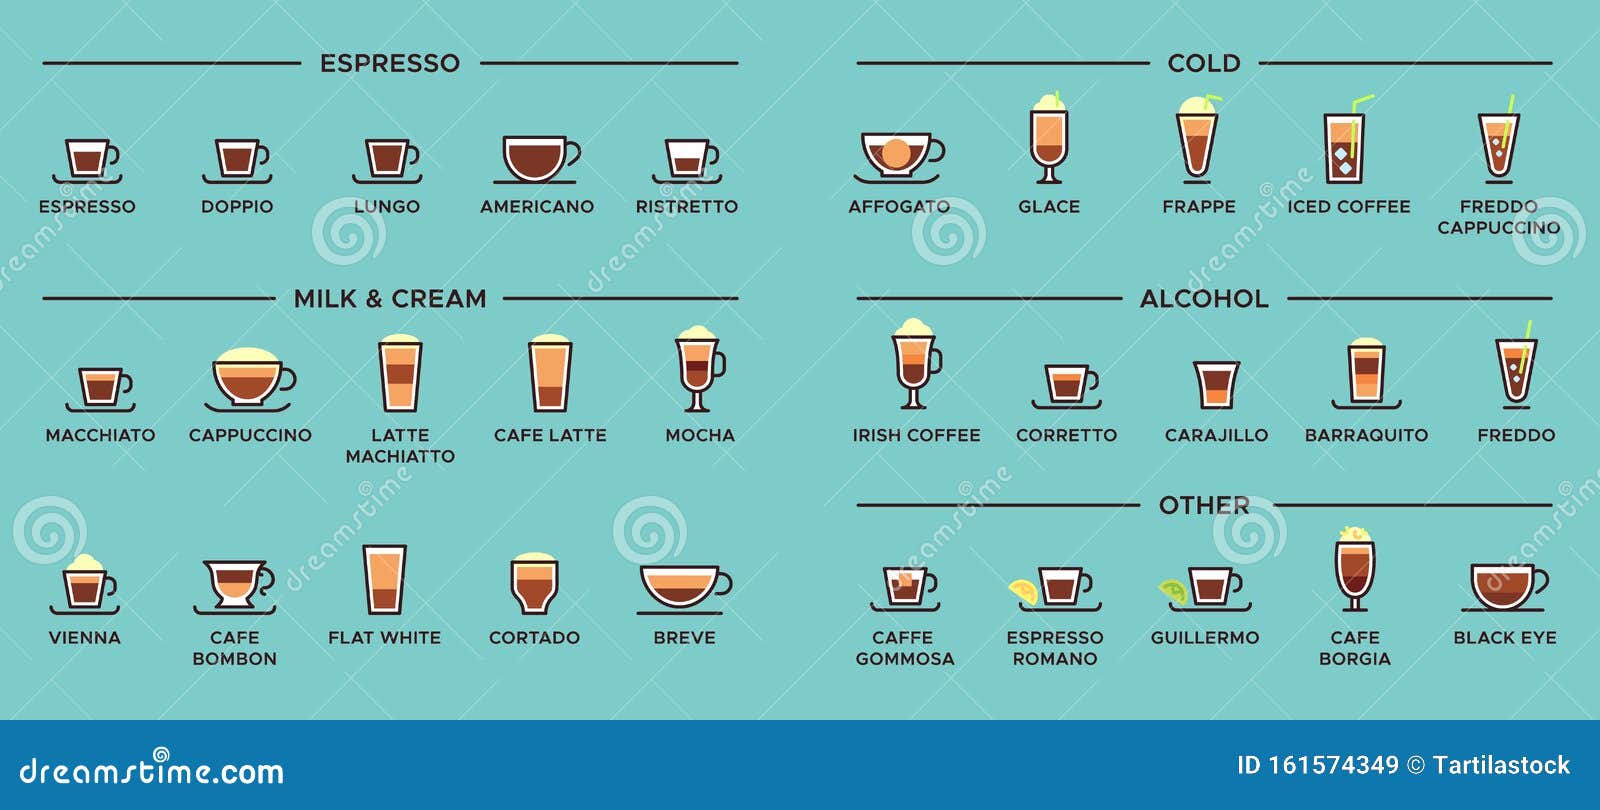 types of coffee. espresso drinks, latte cup and americano infographic scheme  